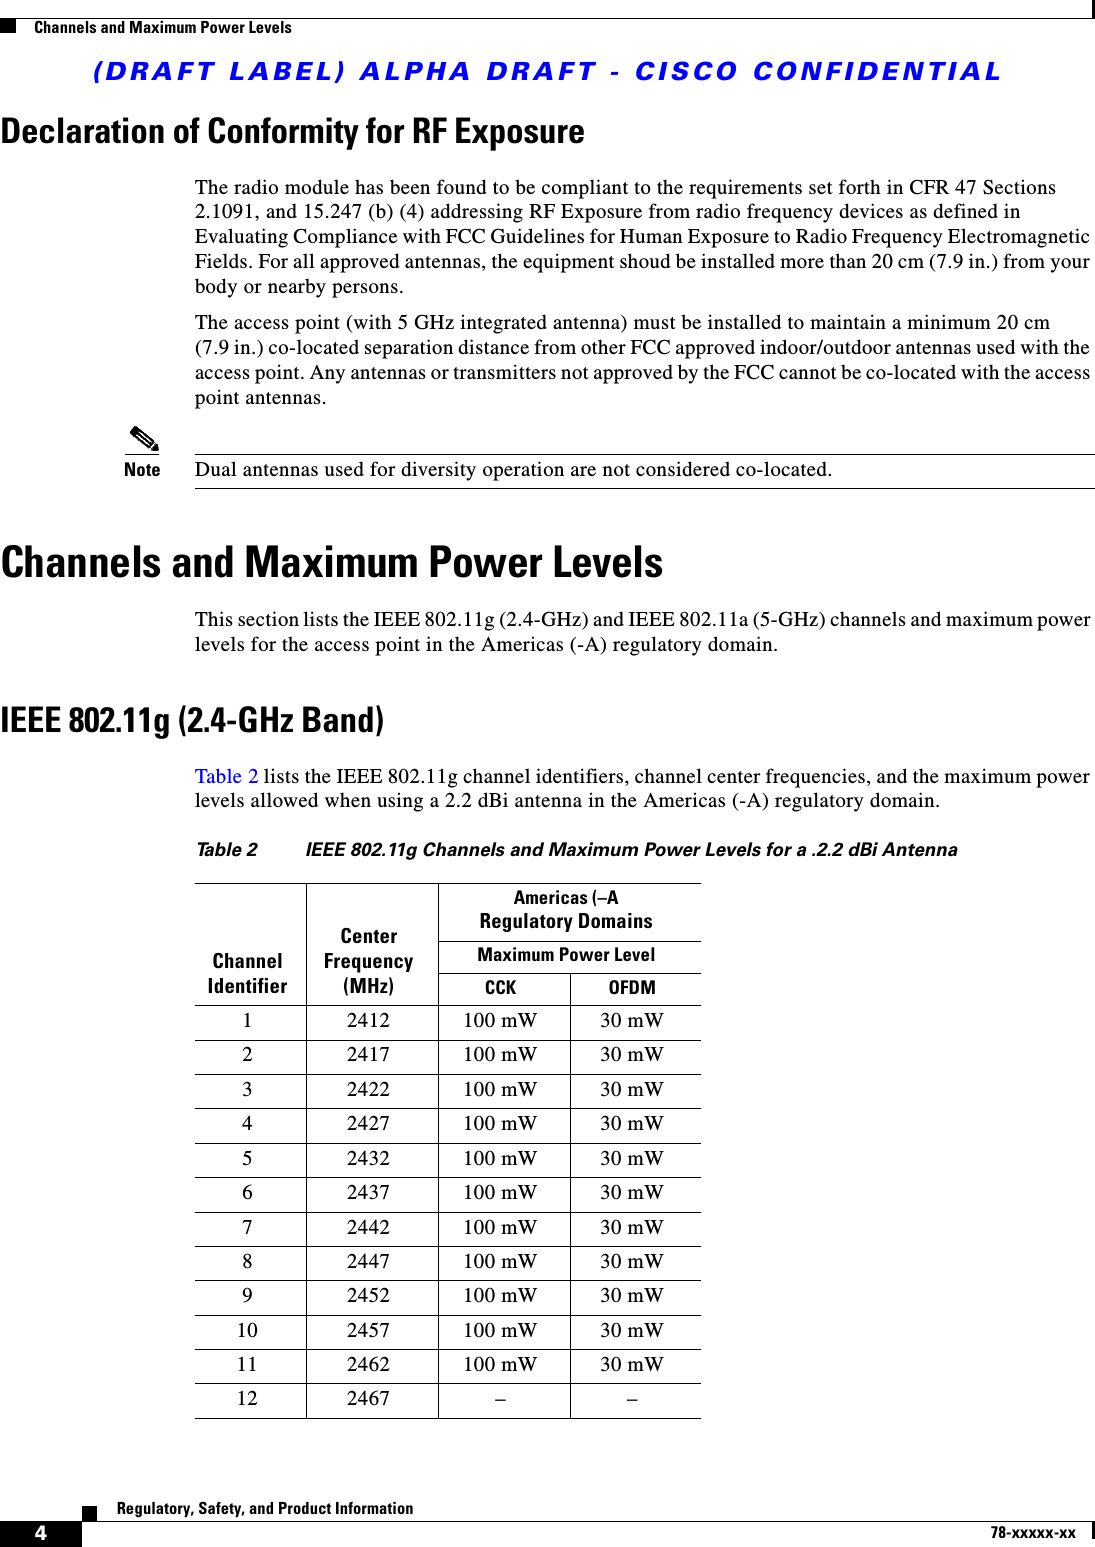 (DRAFT LABEL) ALPHA DRAFT - CISCO CONFIDENTIAL4Regulatory, Safety, and Product Information78-xxxxx-xxChannels and Maximum Power LevelsDeclaration of Conformity for RF ExposureThe radio module has been found to be compliant to the requirements set forth in CFR 47 Sections 2.1091, and 15.247 (b) (4) addressing RF Exposure from radio frequency devices as defined in Evaluating Compliance with FCC Guidelines for Human Exposure to Radio Frequency Electromagnetic Fields. For all approved antennas, the equipment shoud be installed more than 20 cm (7.9 in.) from your body or nearby persons.The access point (with 5 GHz integrated antenna) must be installed to maintain a minimum 20 cm(7.9 in.) co-located separation distance from other FCC approved indoor/outdoor antennas used with the access point. Any antennas or transmitters not approved by the FCC cannot be co-located with the access point antennas. Note Dual antennas used for diversity operation are not considered co-located.Channels and Maximum Power LevelsThis section lists the IEEE 802.11g (2.4-GHz) and IEEE 802.11a (5-GHz) channels and maximum power levels for the access point in the Americas (-A) regulatory domain. IEEE 802.11g (2.4-GHz Band)Table 2 lists the IEEE 802.11g channel identifiers, channel center frequencies, and the maximum power levels allowed when using a 2.2 dBi antenna in the Americas (-A) regulatory domain.Table 2  IEEE 802.11g Channels and Maximum Power Levels for a .2.2 dBi AntennaChannel IdentifierCenter Frequency (MHz)Americas (–ARegulatory DomainsMaximum Power Level CCK OFDM1 2412 100 mW 30 mW2 2417 100 mW 30 mW3 2422 100 mW 30 mW4 2427 100 mW 30 mW5 2432 100 mW 30 mW6 2437 100 mW 30 mW7 2442 100 mW 30 mW8 2447 100 mW 30 mW9 2452 100 mW 30 mW10 2457 100 mW 30 mW11 2462 100 mW 30 mW12 2467 – –